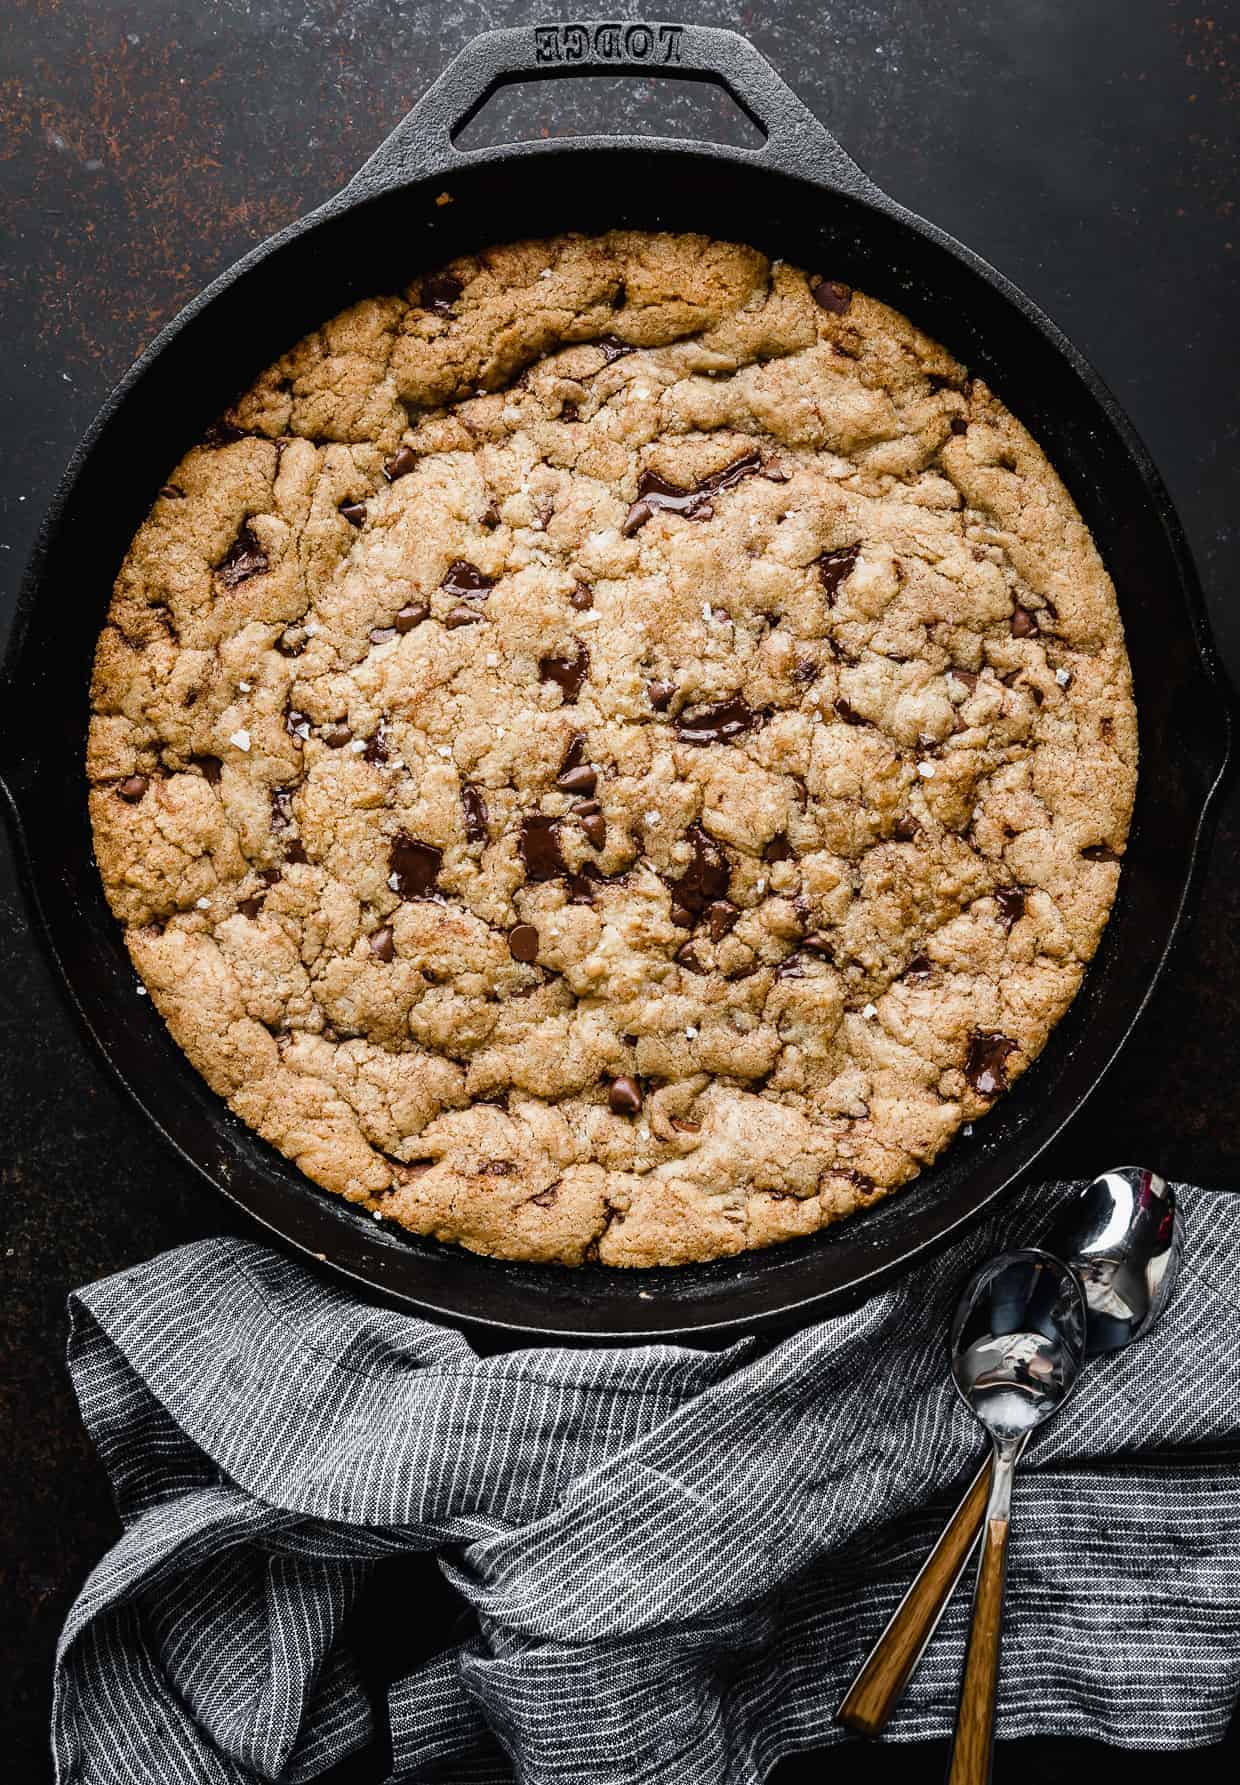 A chocolate chip cookie baked in a large cast iron skillet, against a dark brown background.